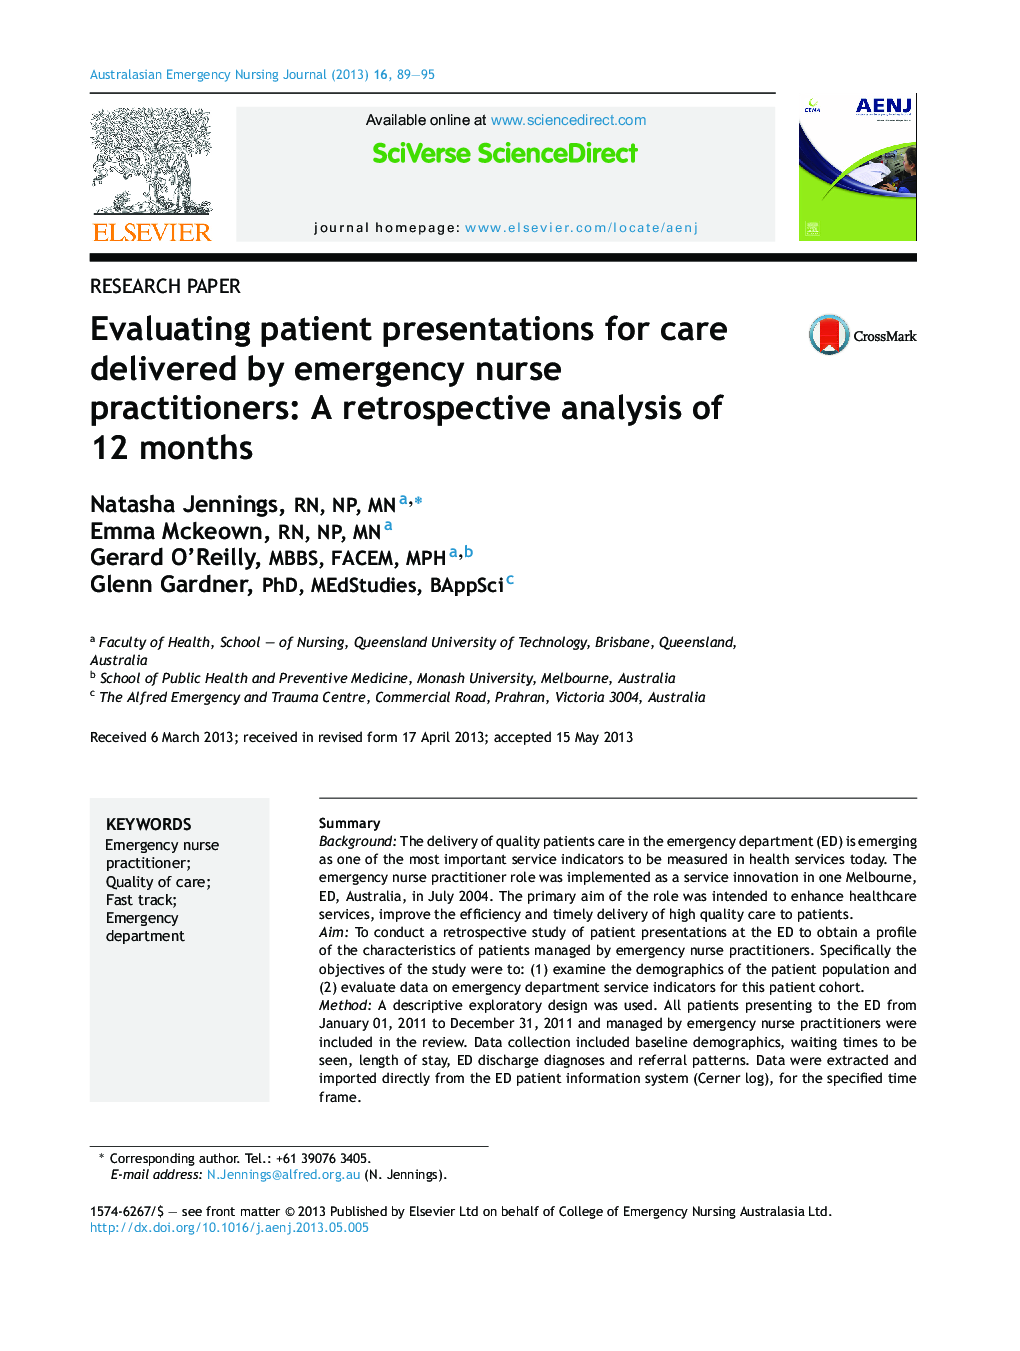 Evaluating patient presentations for care delivered by emergency nurse practitioners: A retrospective analysis of 12 months